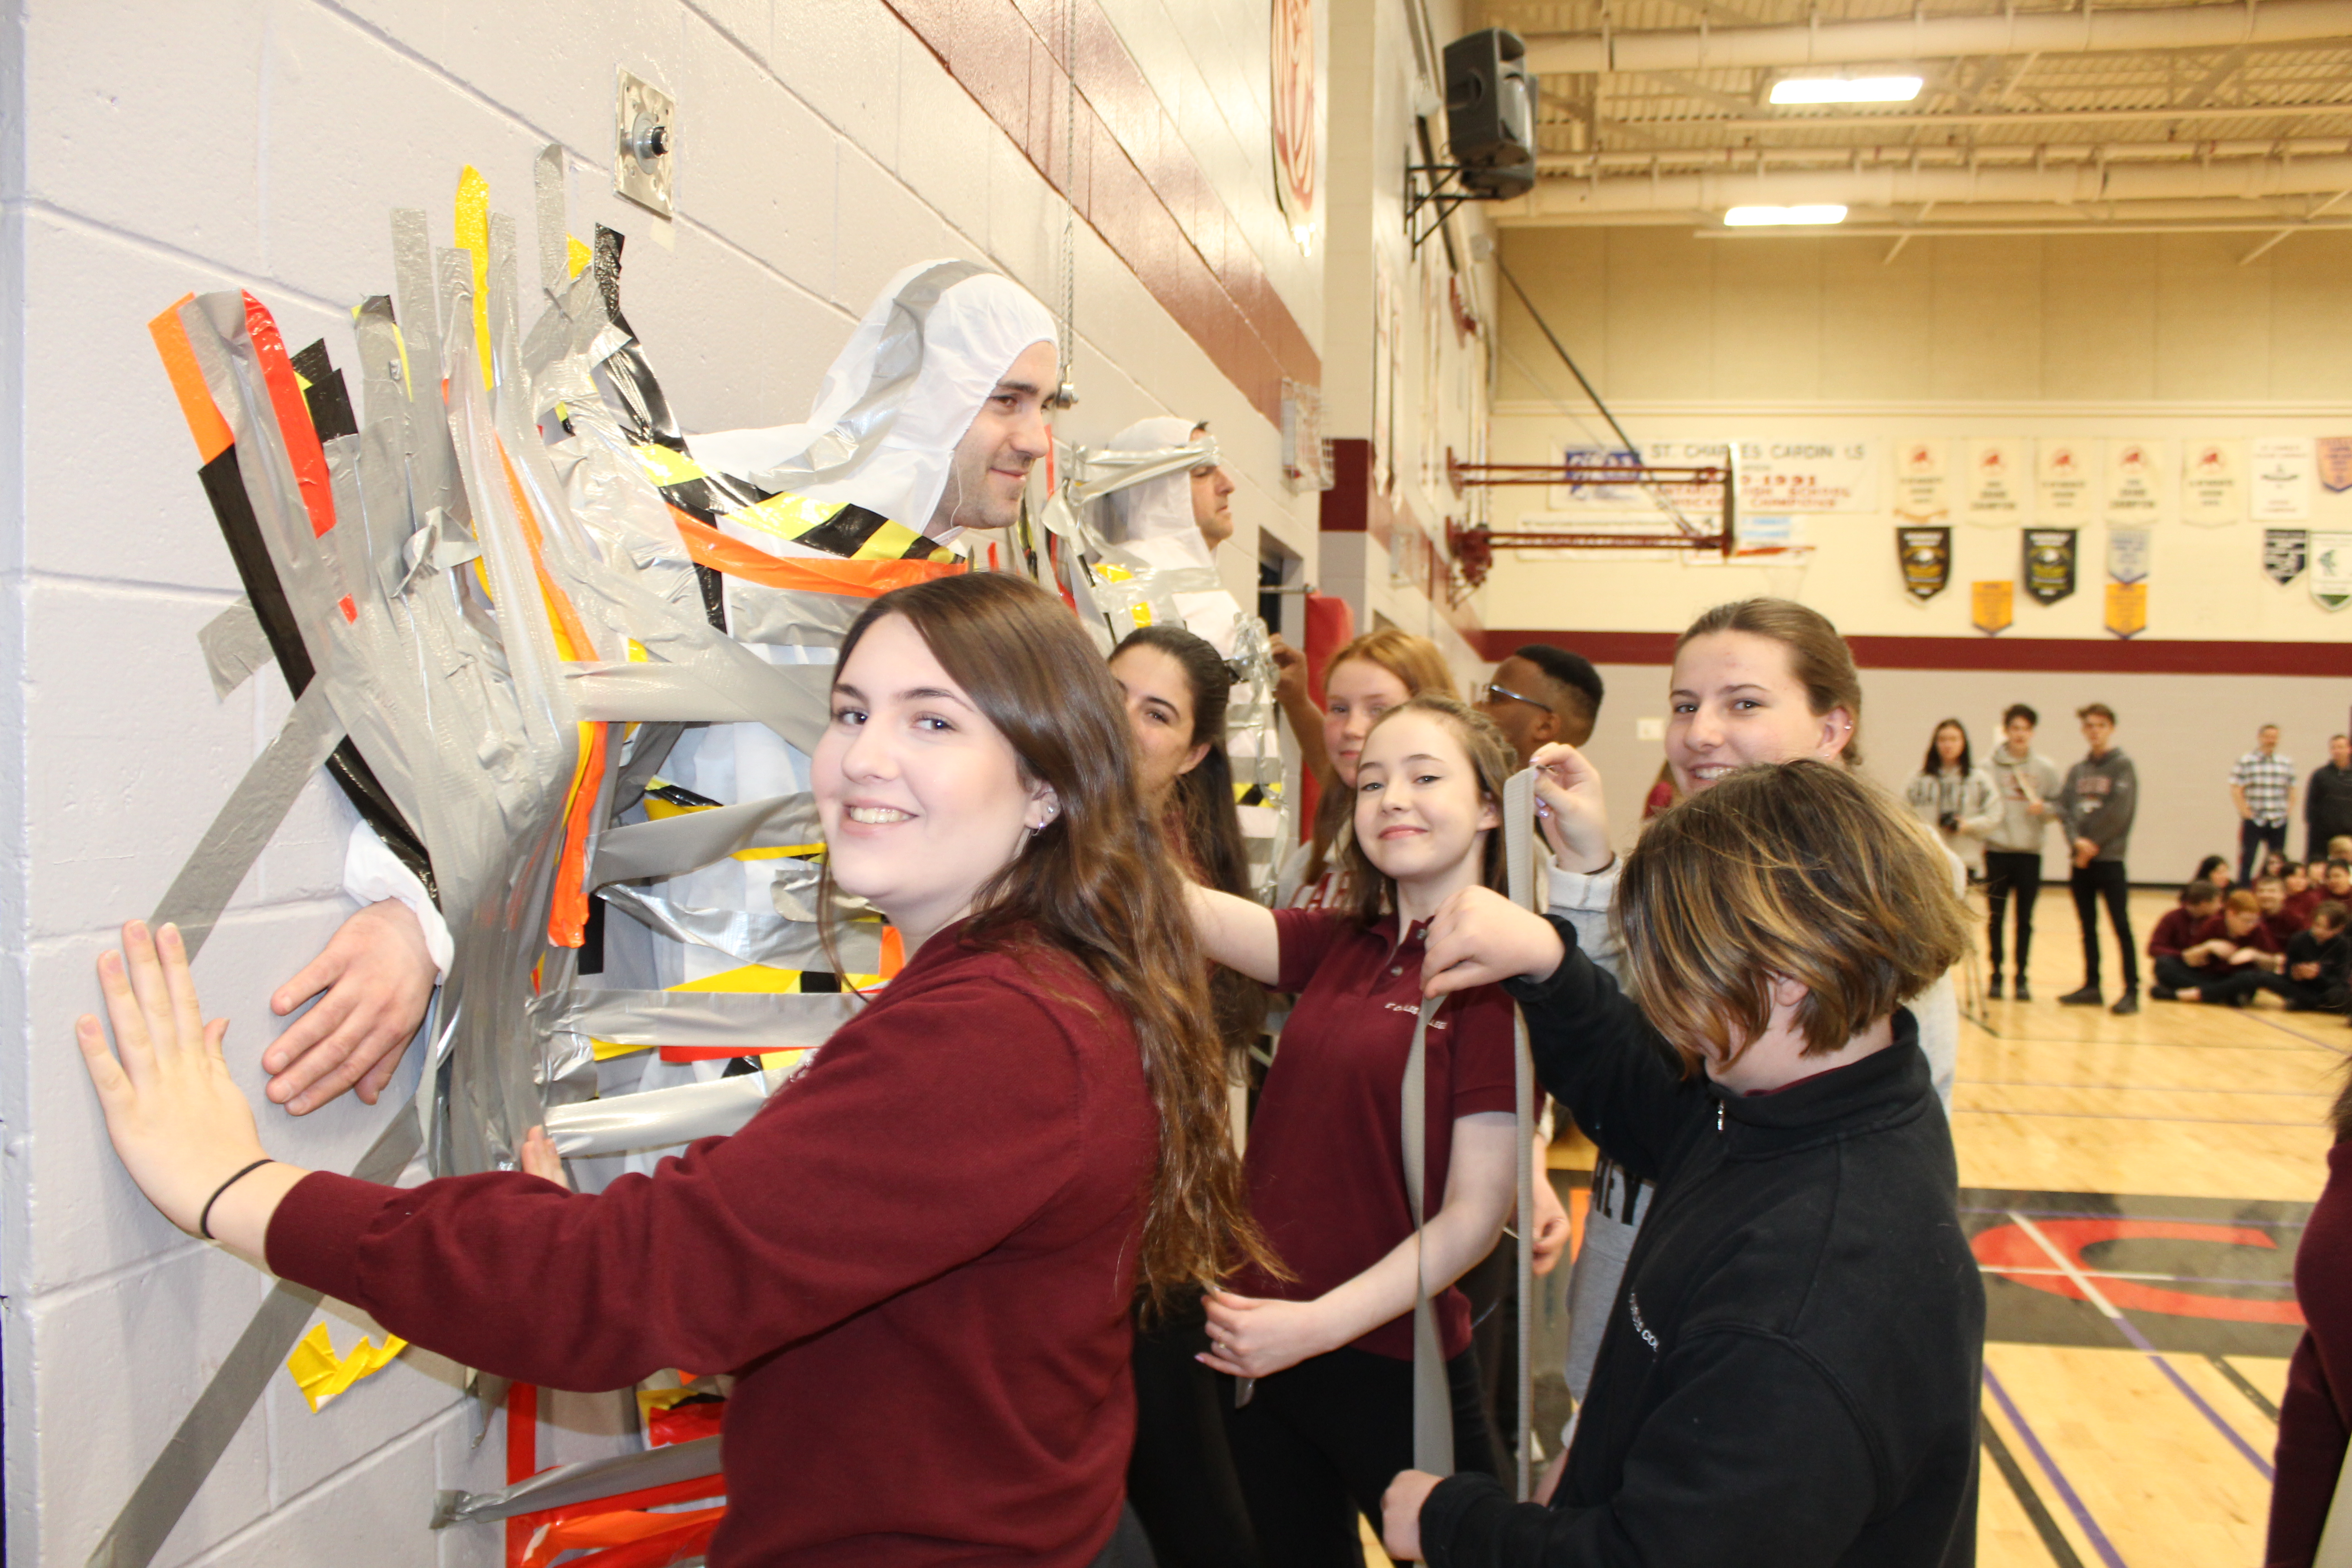 A group of girls tape their Vice Principal to the wall.